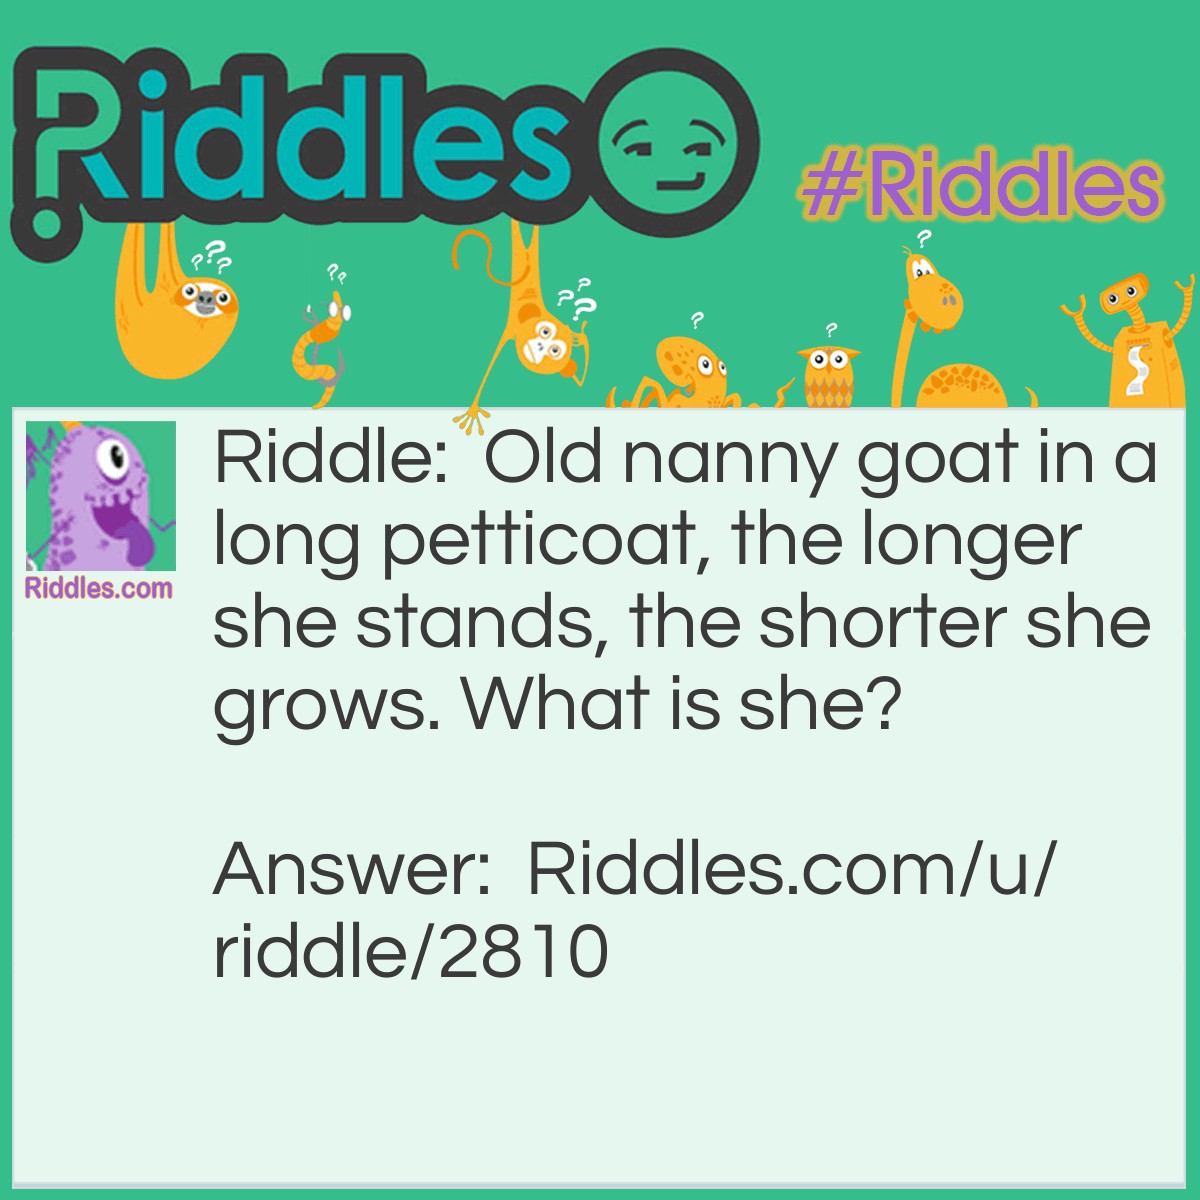 Riddle: Old nanny goat in a long petticoat, the longer she stands, the shorter she grows. What is she? Answer: A Lit Candle.